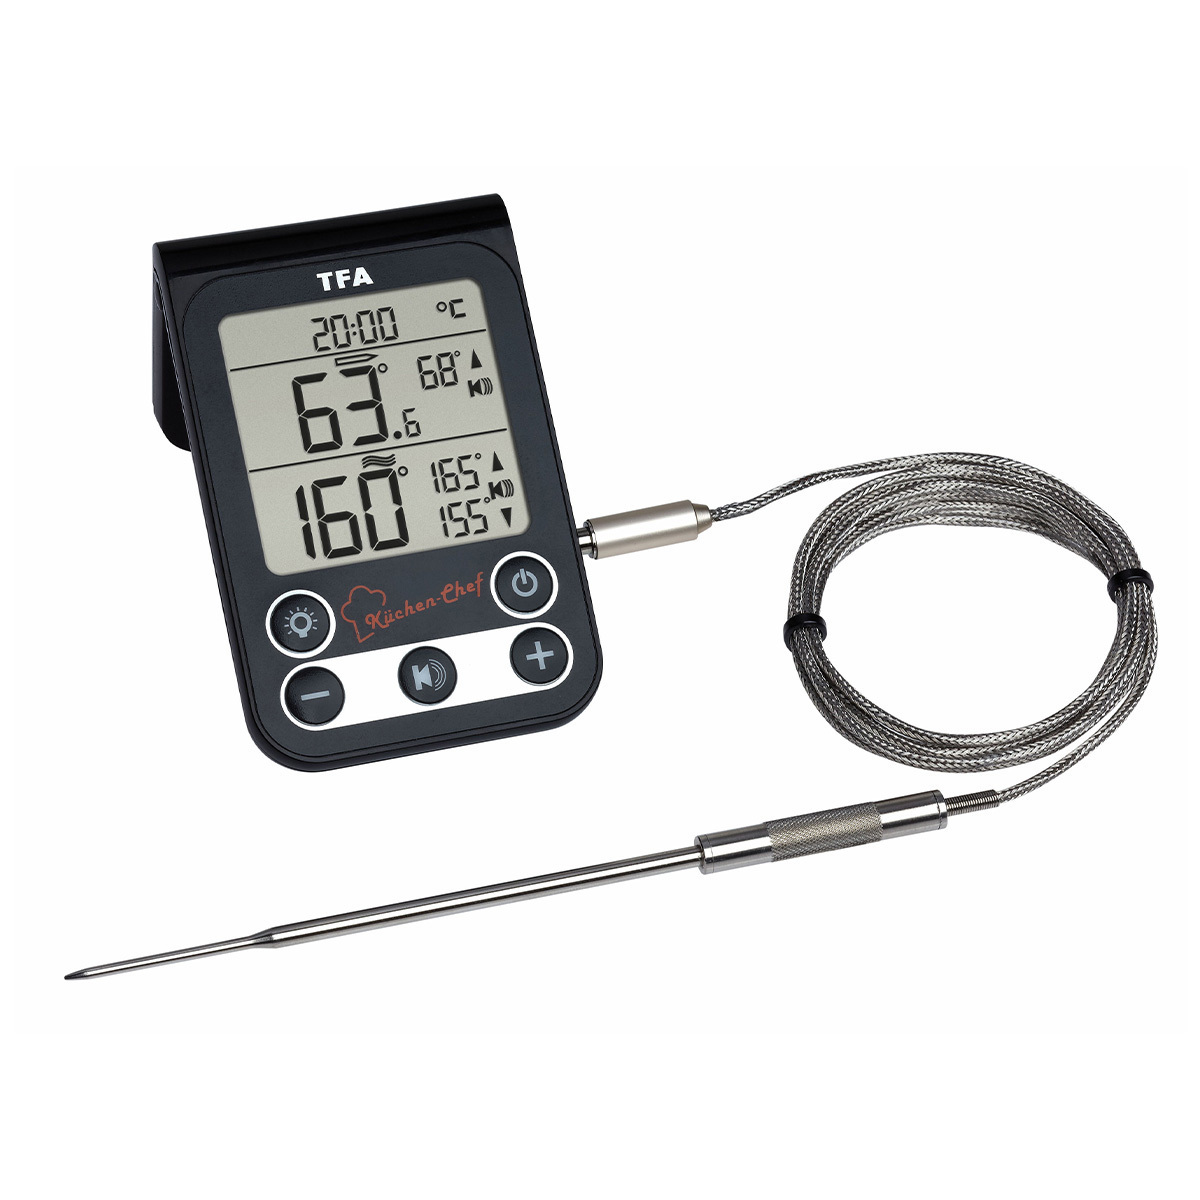 Digital BBQ meat/oven thermometer KÜCHEN-CHEF